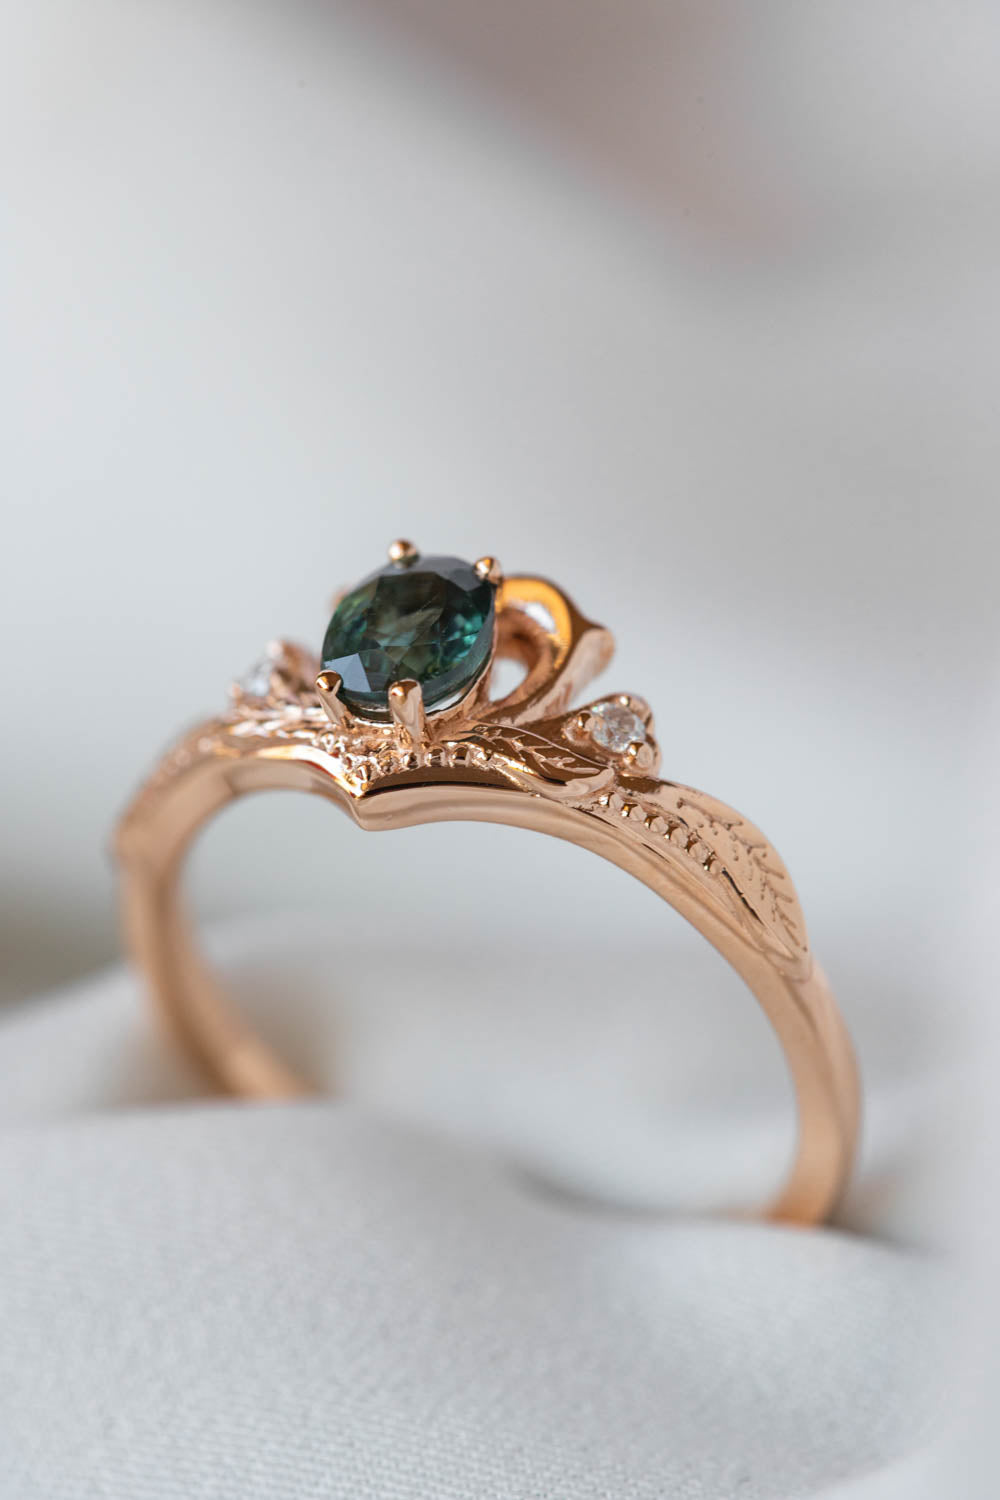 READY TO SHIP: Amura in 14K rose gold, natural oval cut teal sapphire 6.3x5.3 mm, moissanites, RING SIZE 7 US - Eden Garden Jewelry™